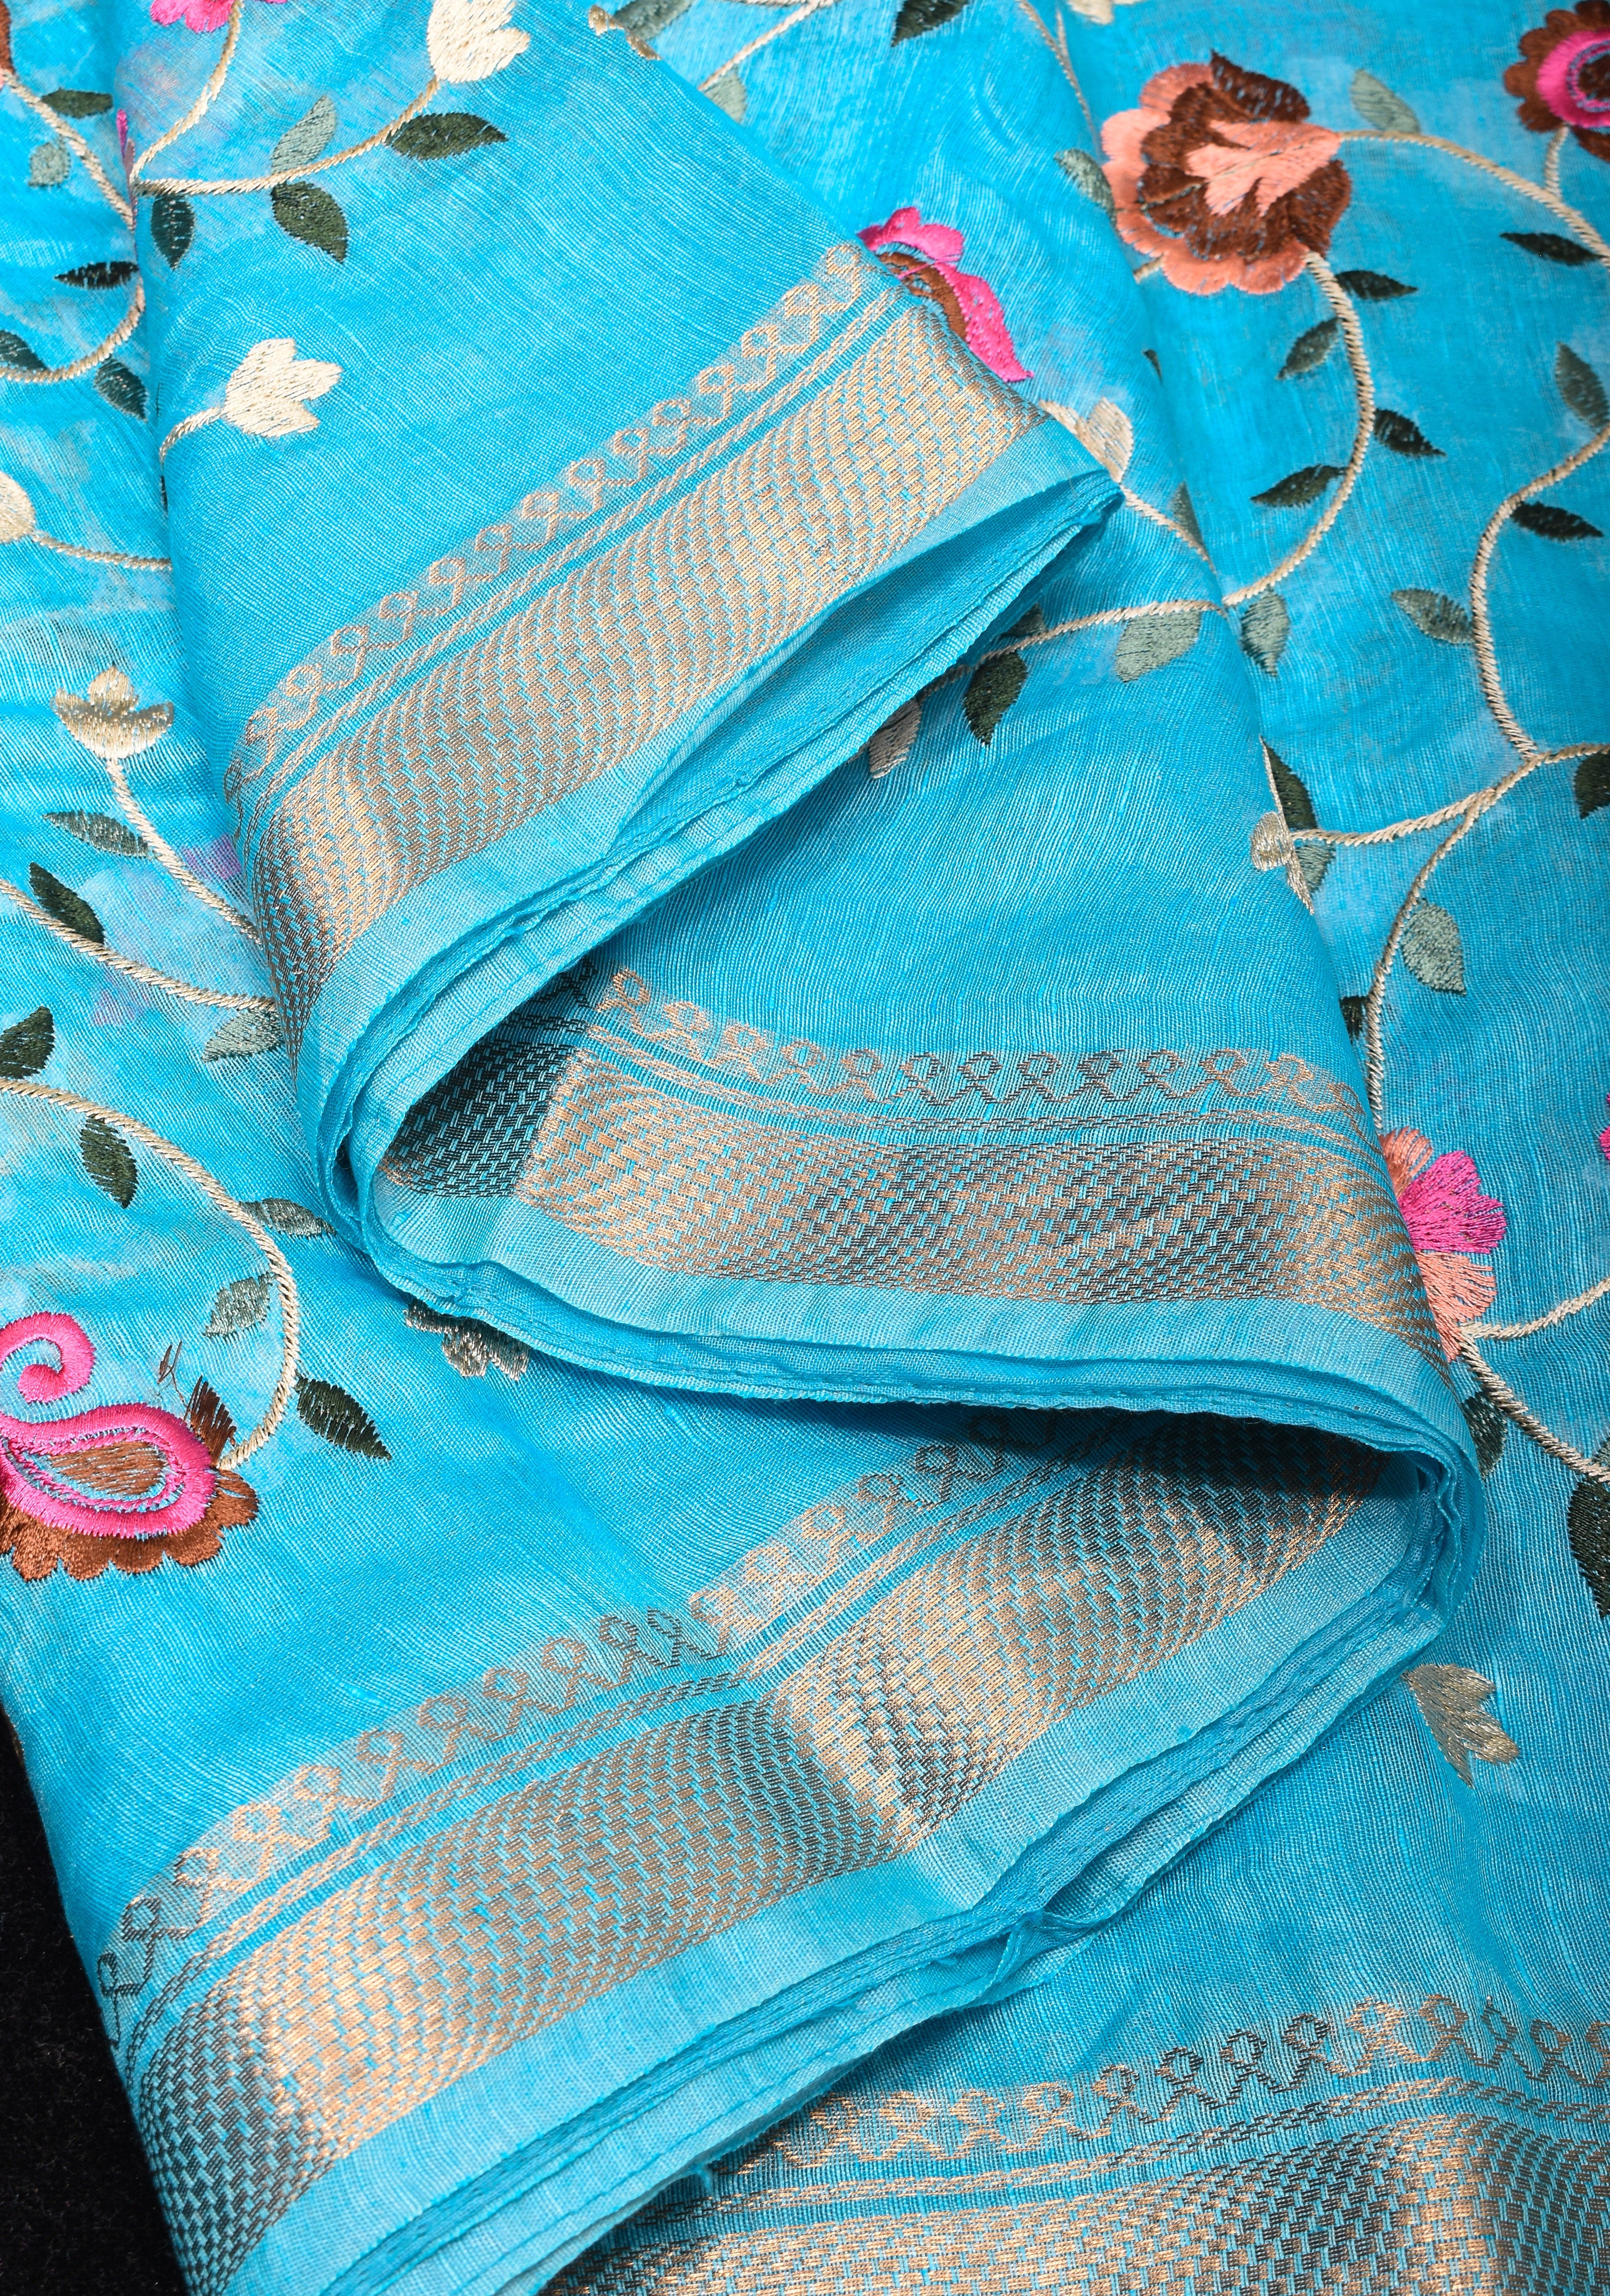 Floral Jaal embroidery on Silk Linen In Blue with woven zari borders